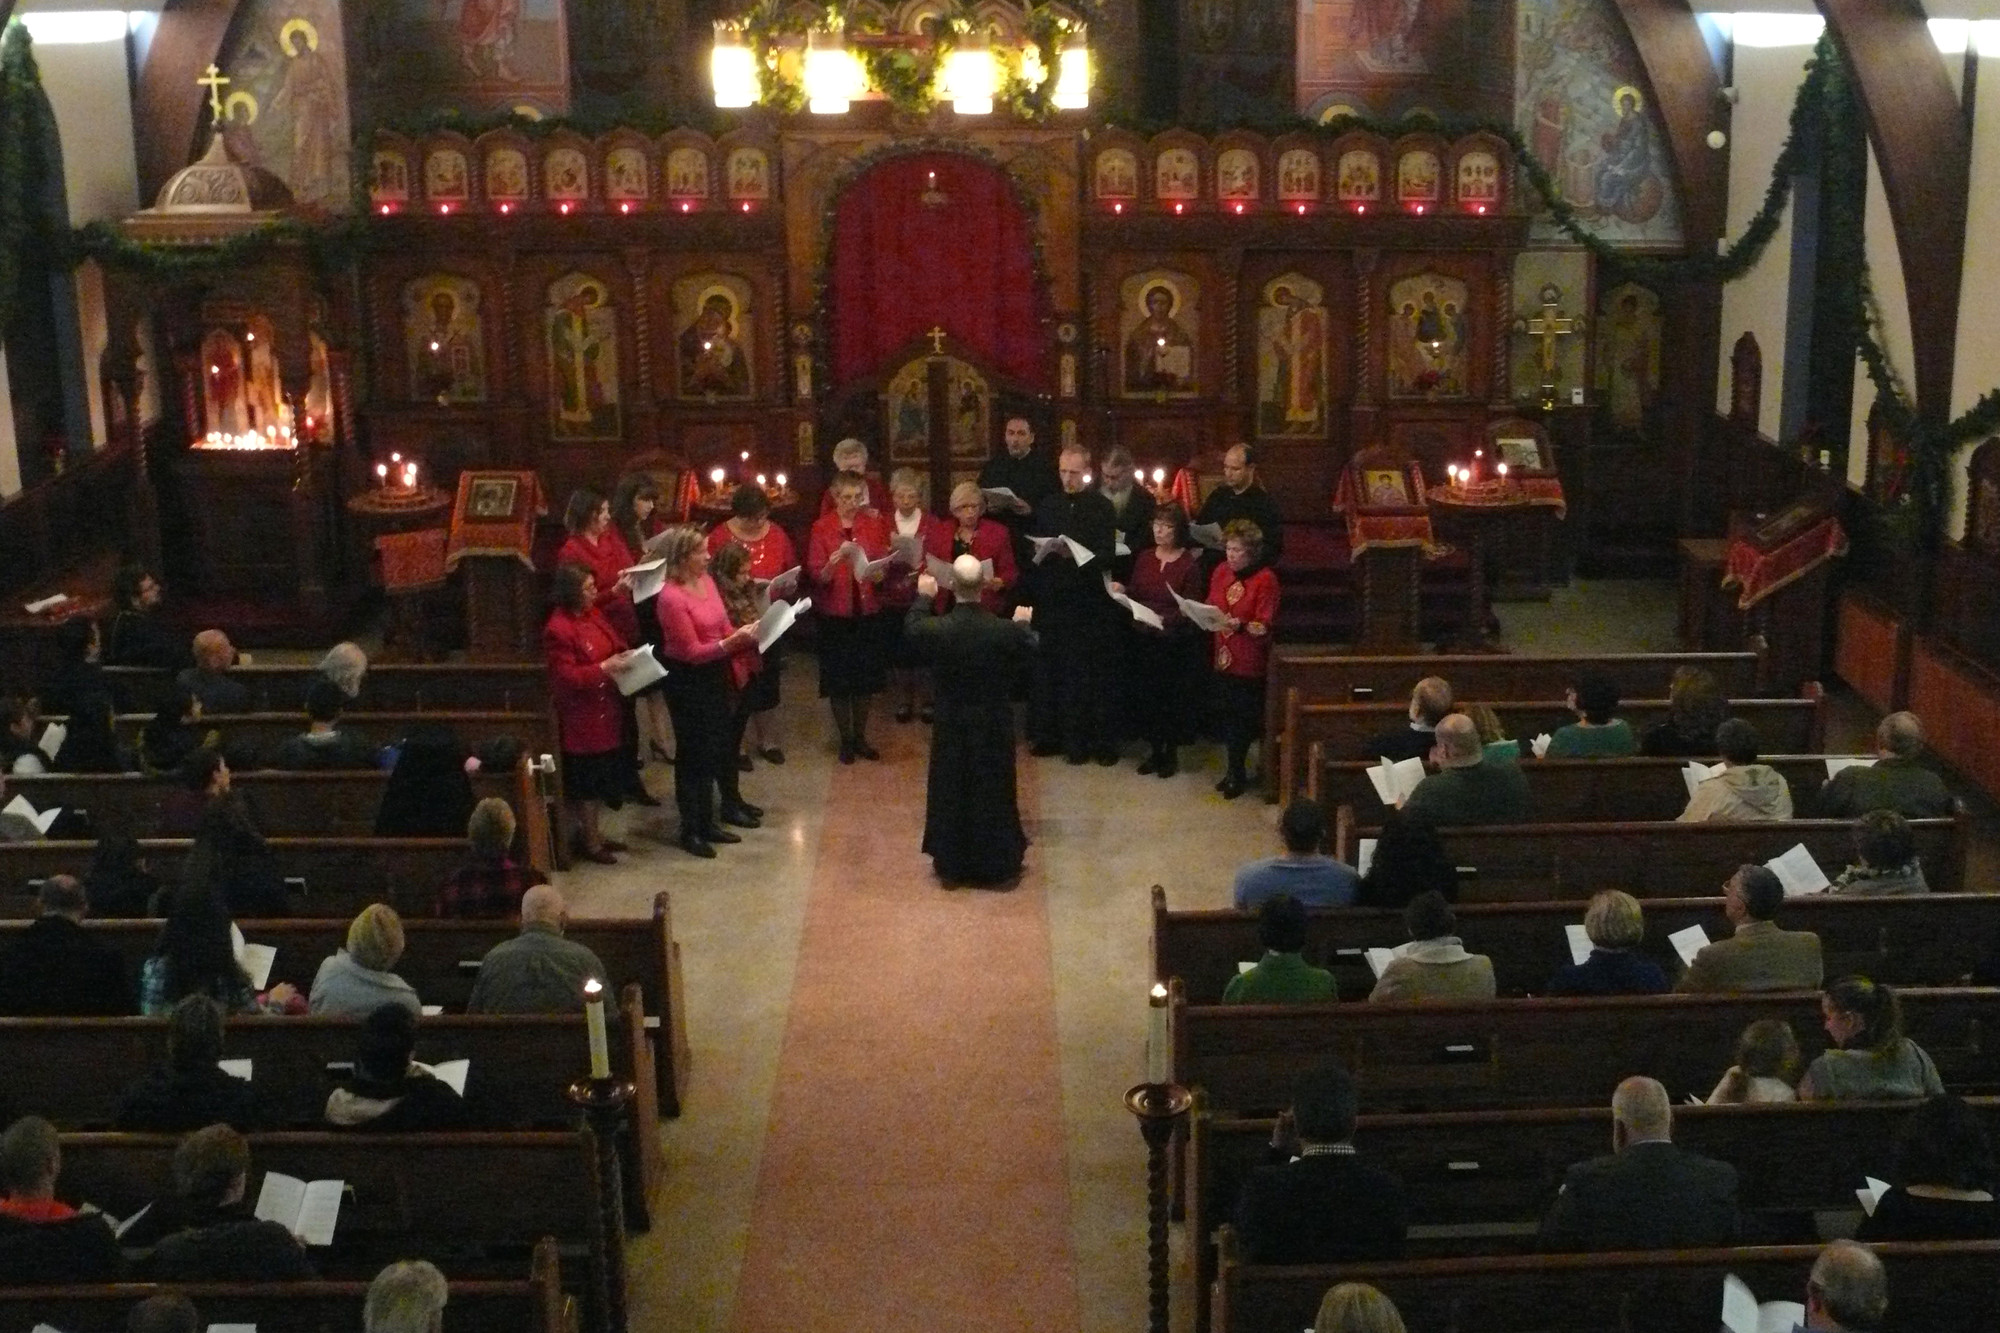 The choir’s voices soared throughout the Holy Trinity Orthodox Church on Green Avenue in East Meadow at their Dec. 5 Christmas concert.